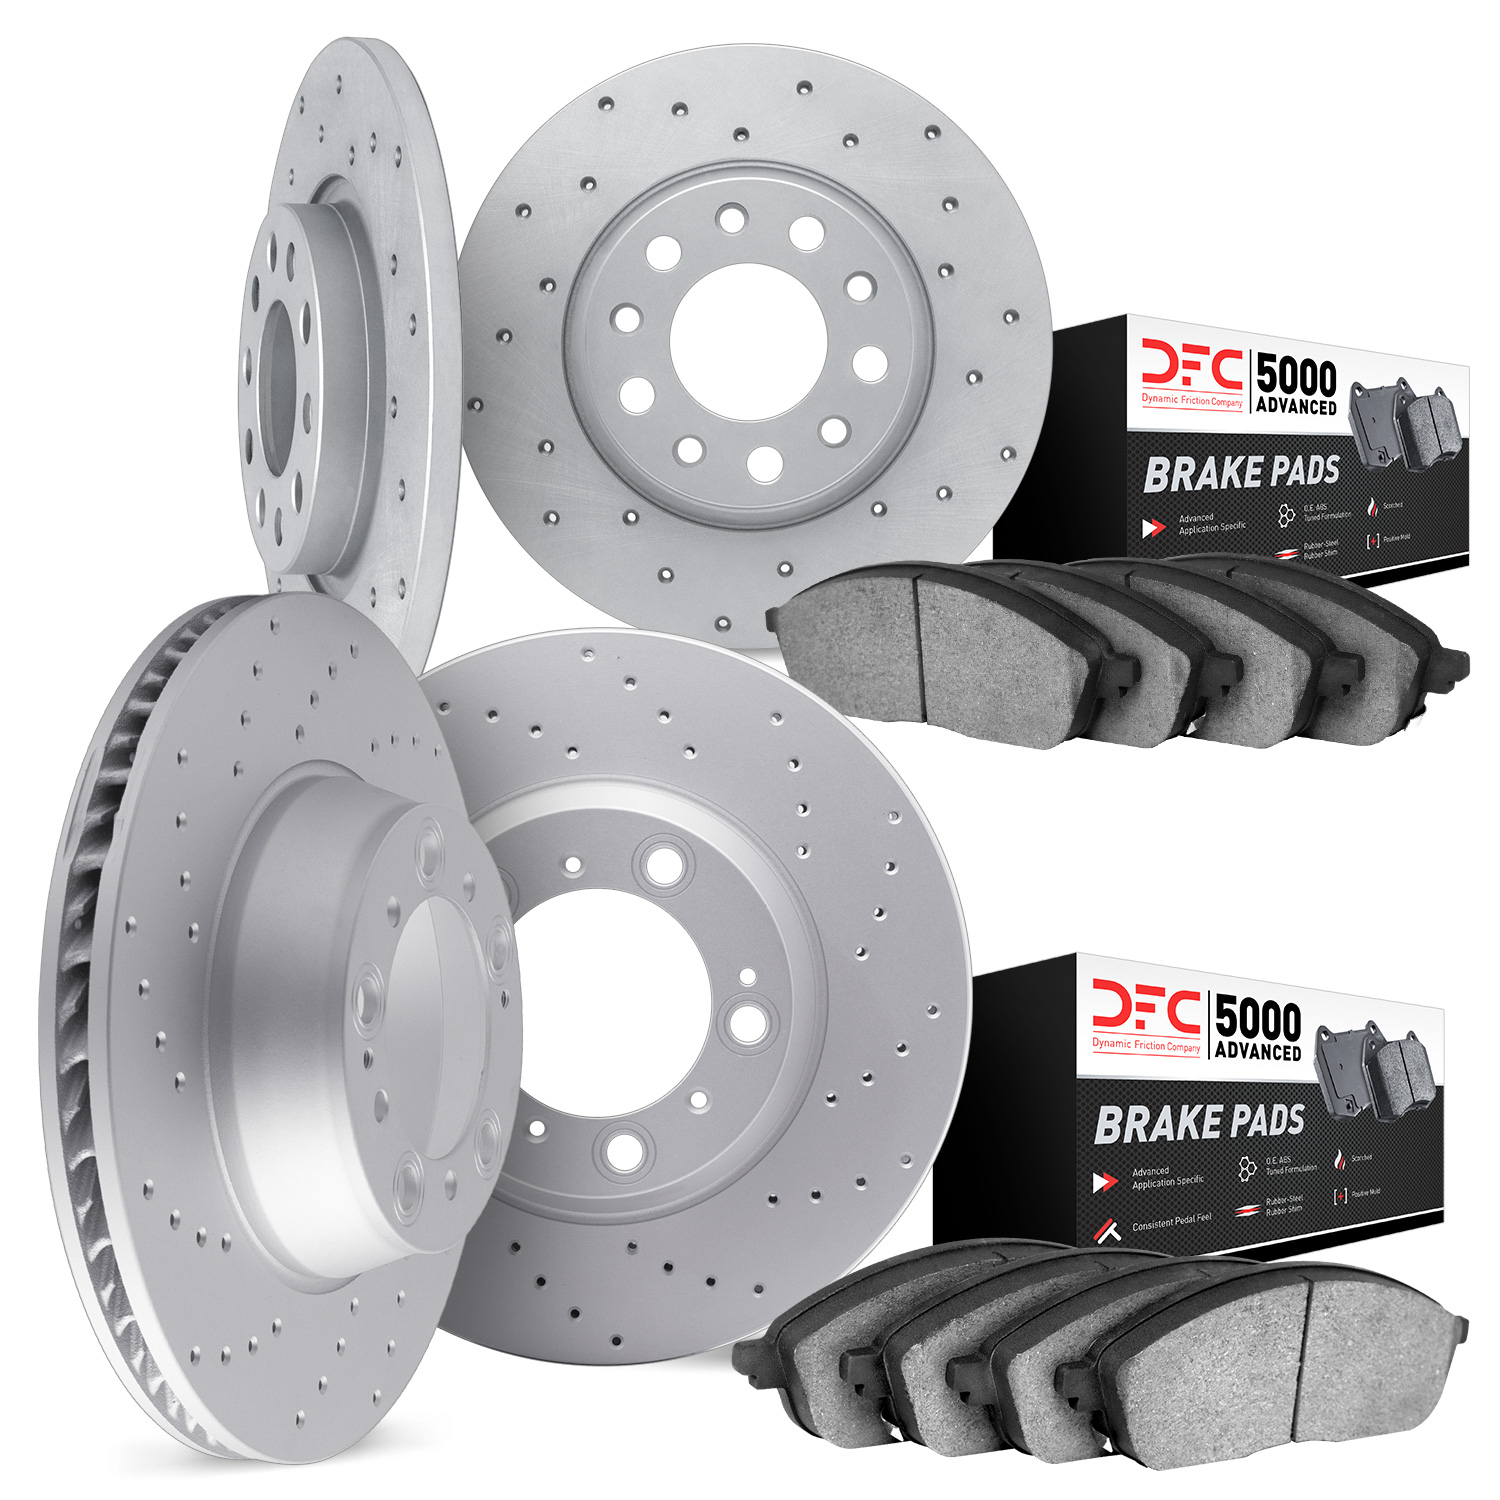 2704-63000 Geoperformance Drilled Brake Rotors with Active Performance Pads Kit, 1998-2005 Mercedes-Benz, Position: Front and Re